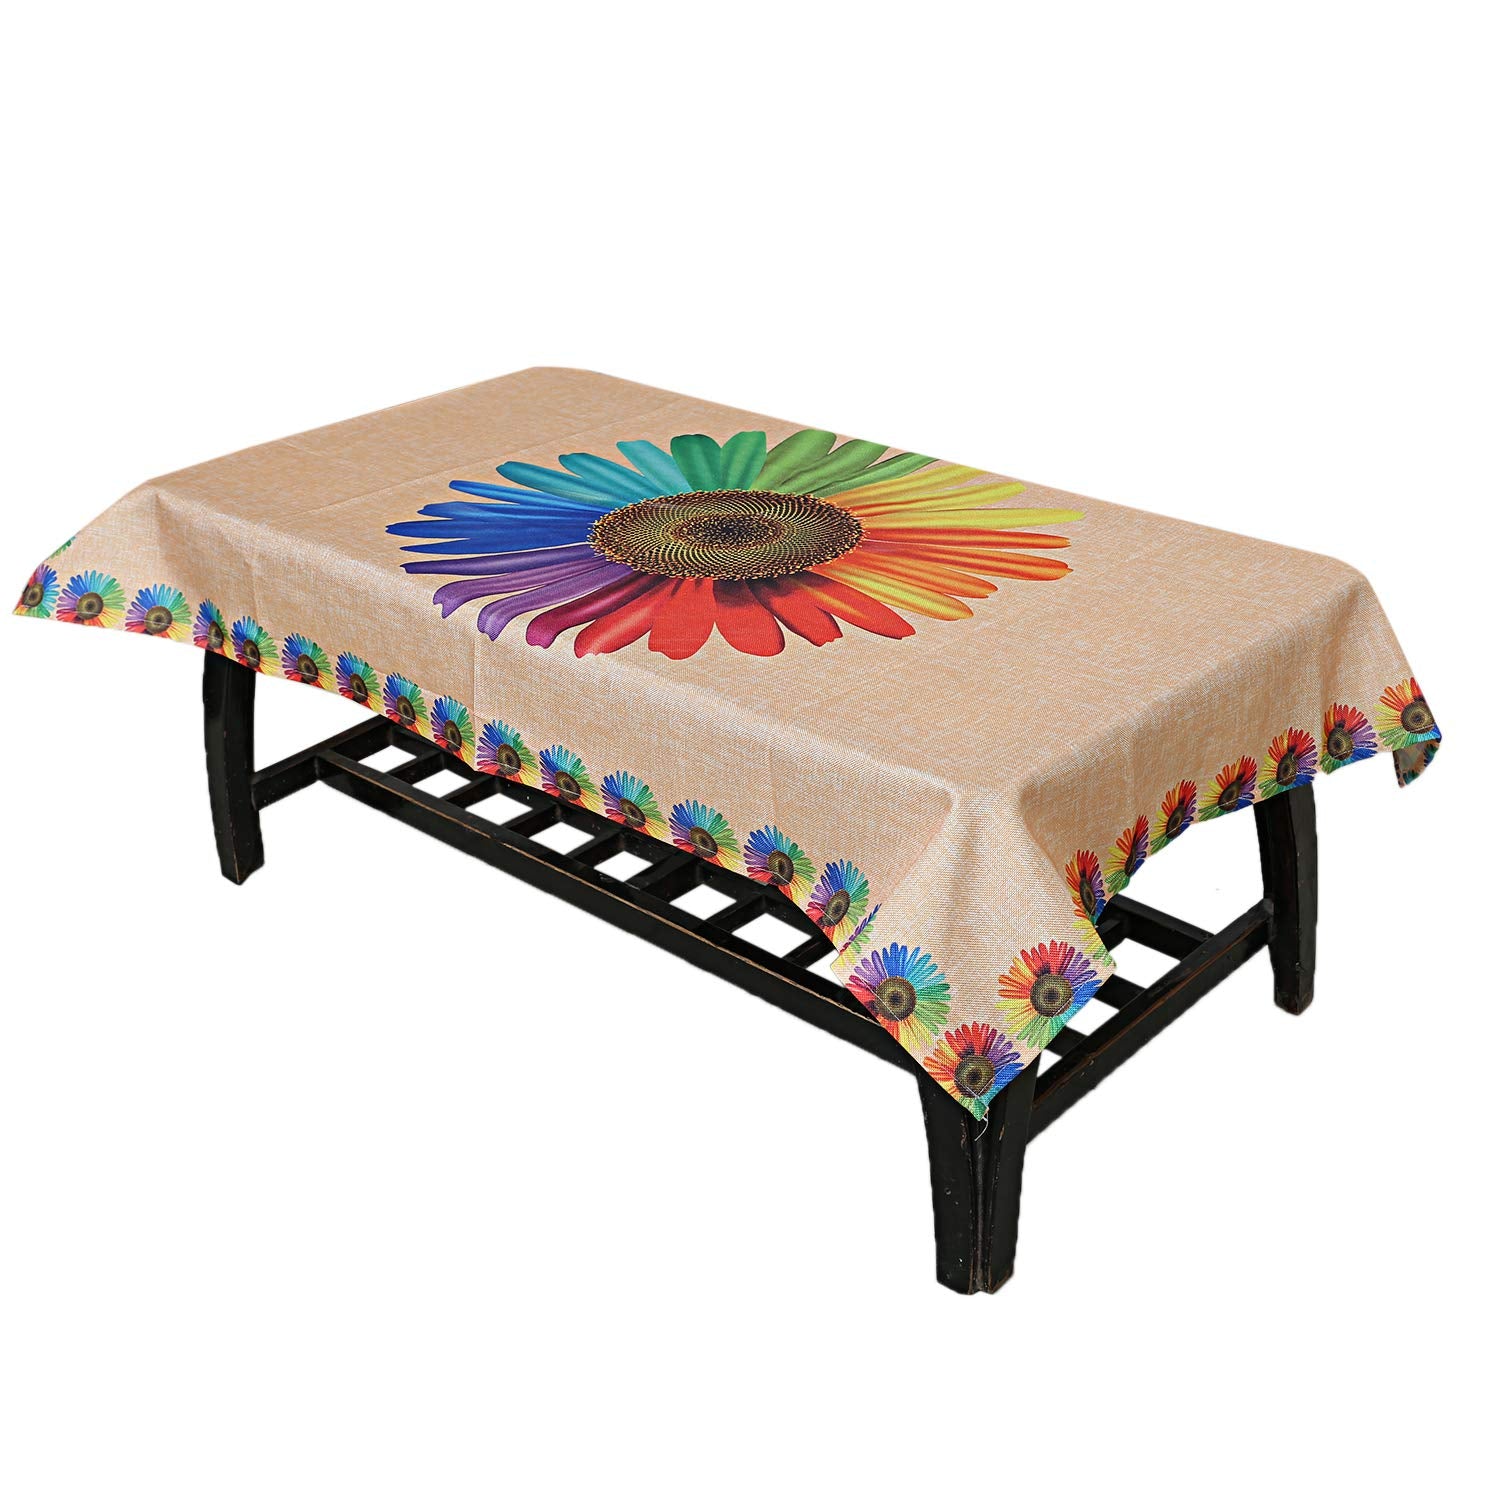 Kuber Industries Center Table Cover|Table Cover 4 Seater|Sun Flower Design|Jute Table Cloth (Gold)